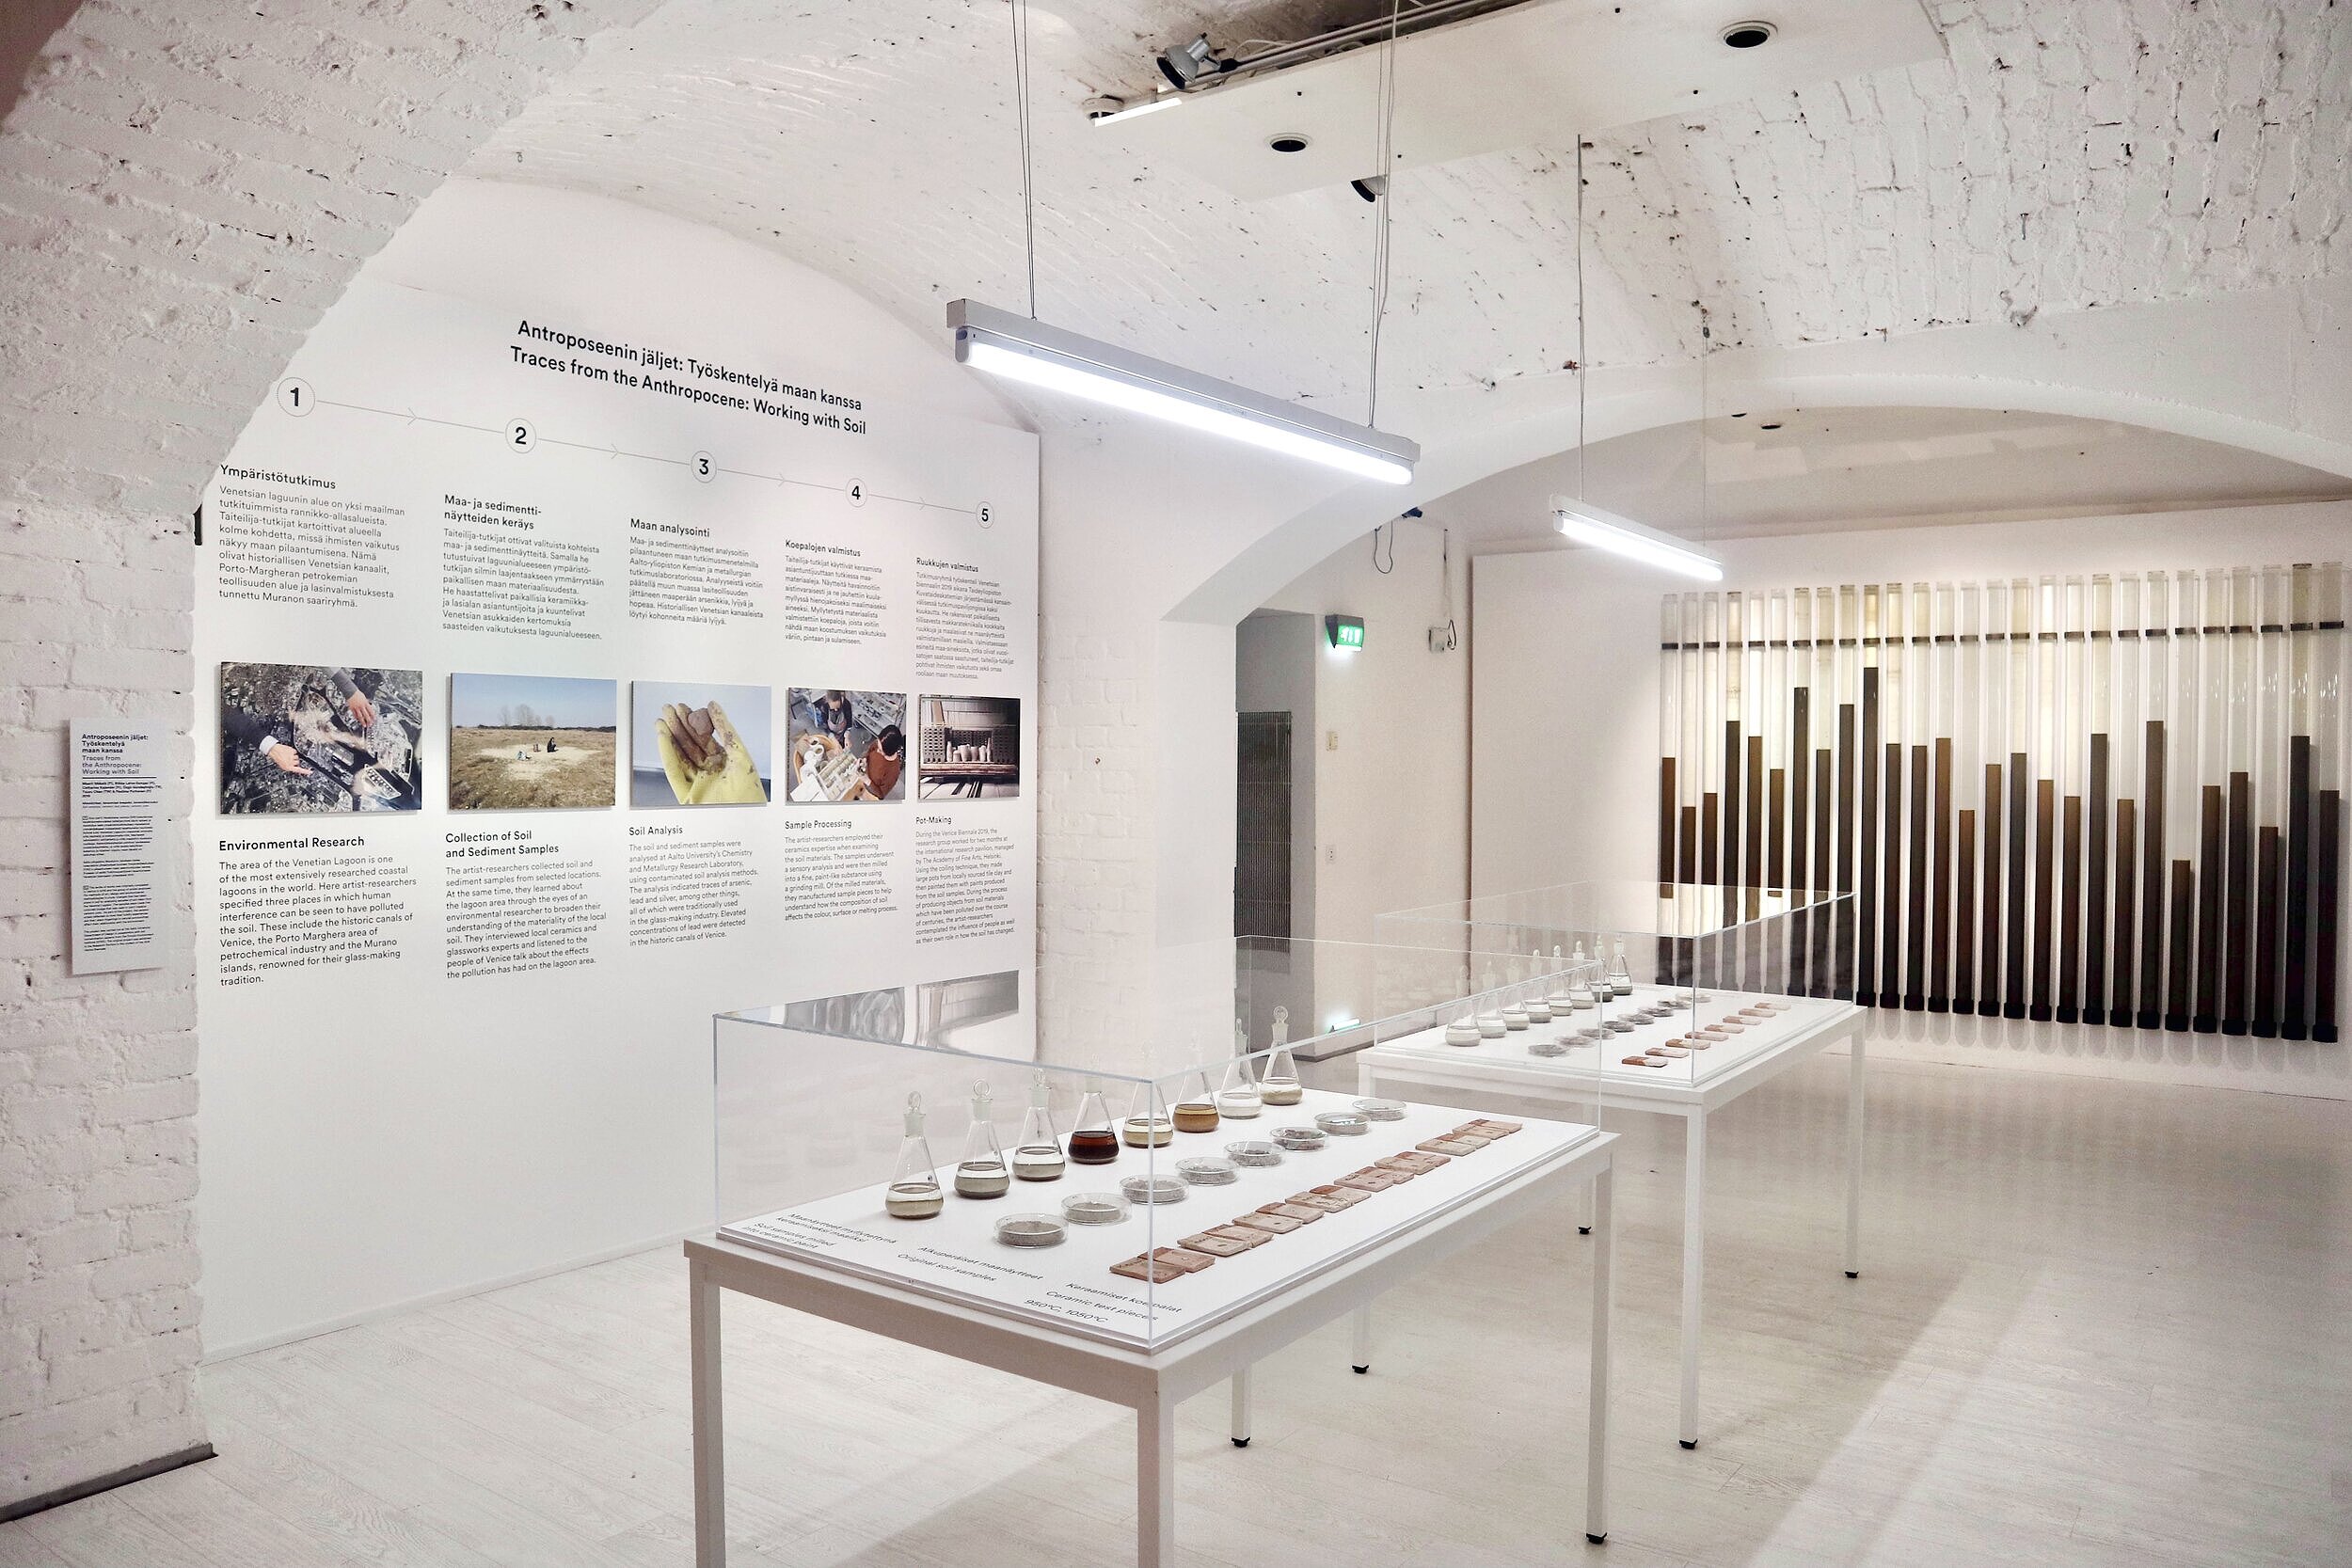   The research process of the Traces from the Anthropocene: Working with Soil project (on wall) shows how the contaminated soil and sediment from the Venice Lagoon area was collected, analysed and transformed to ceramic material. Photo: Tzuyu Chen  